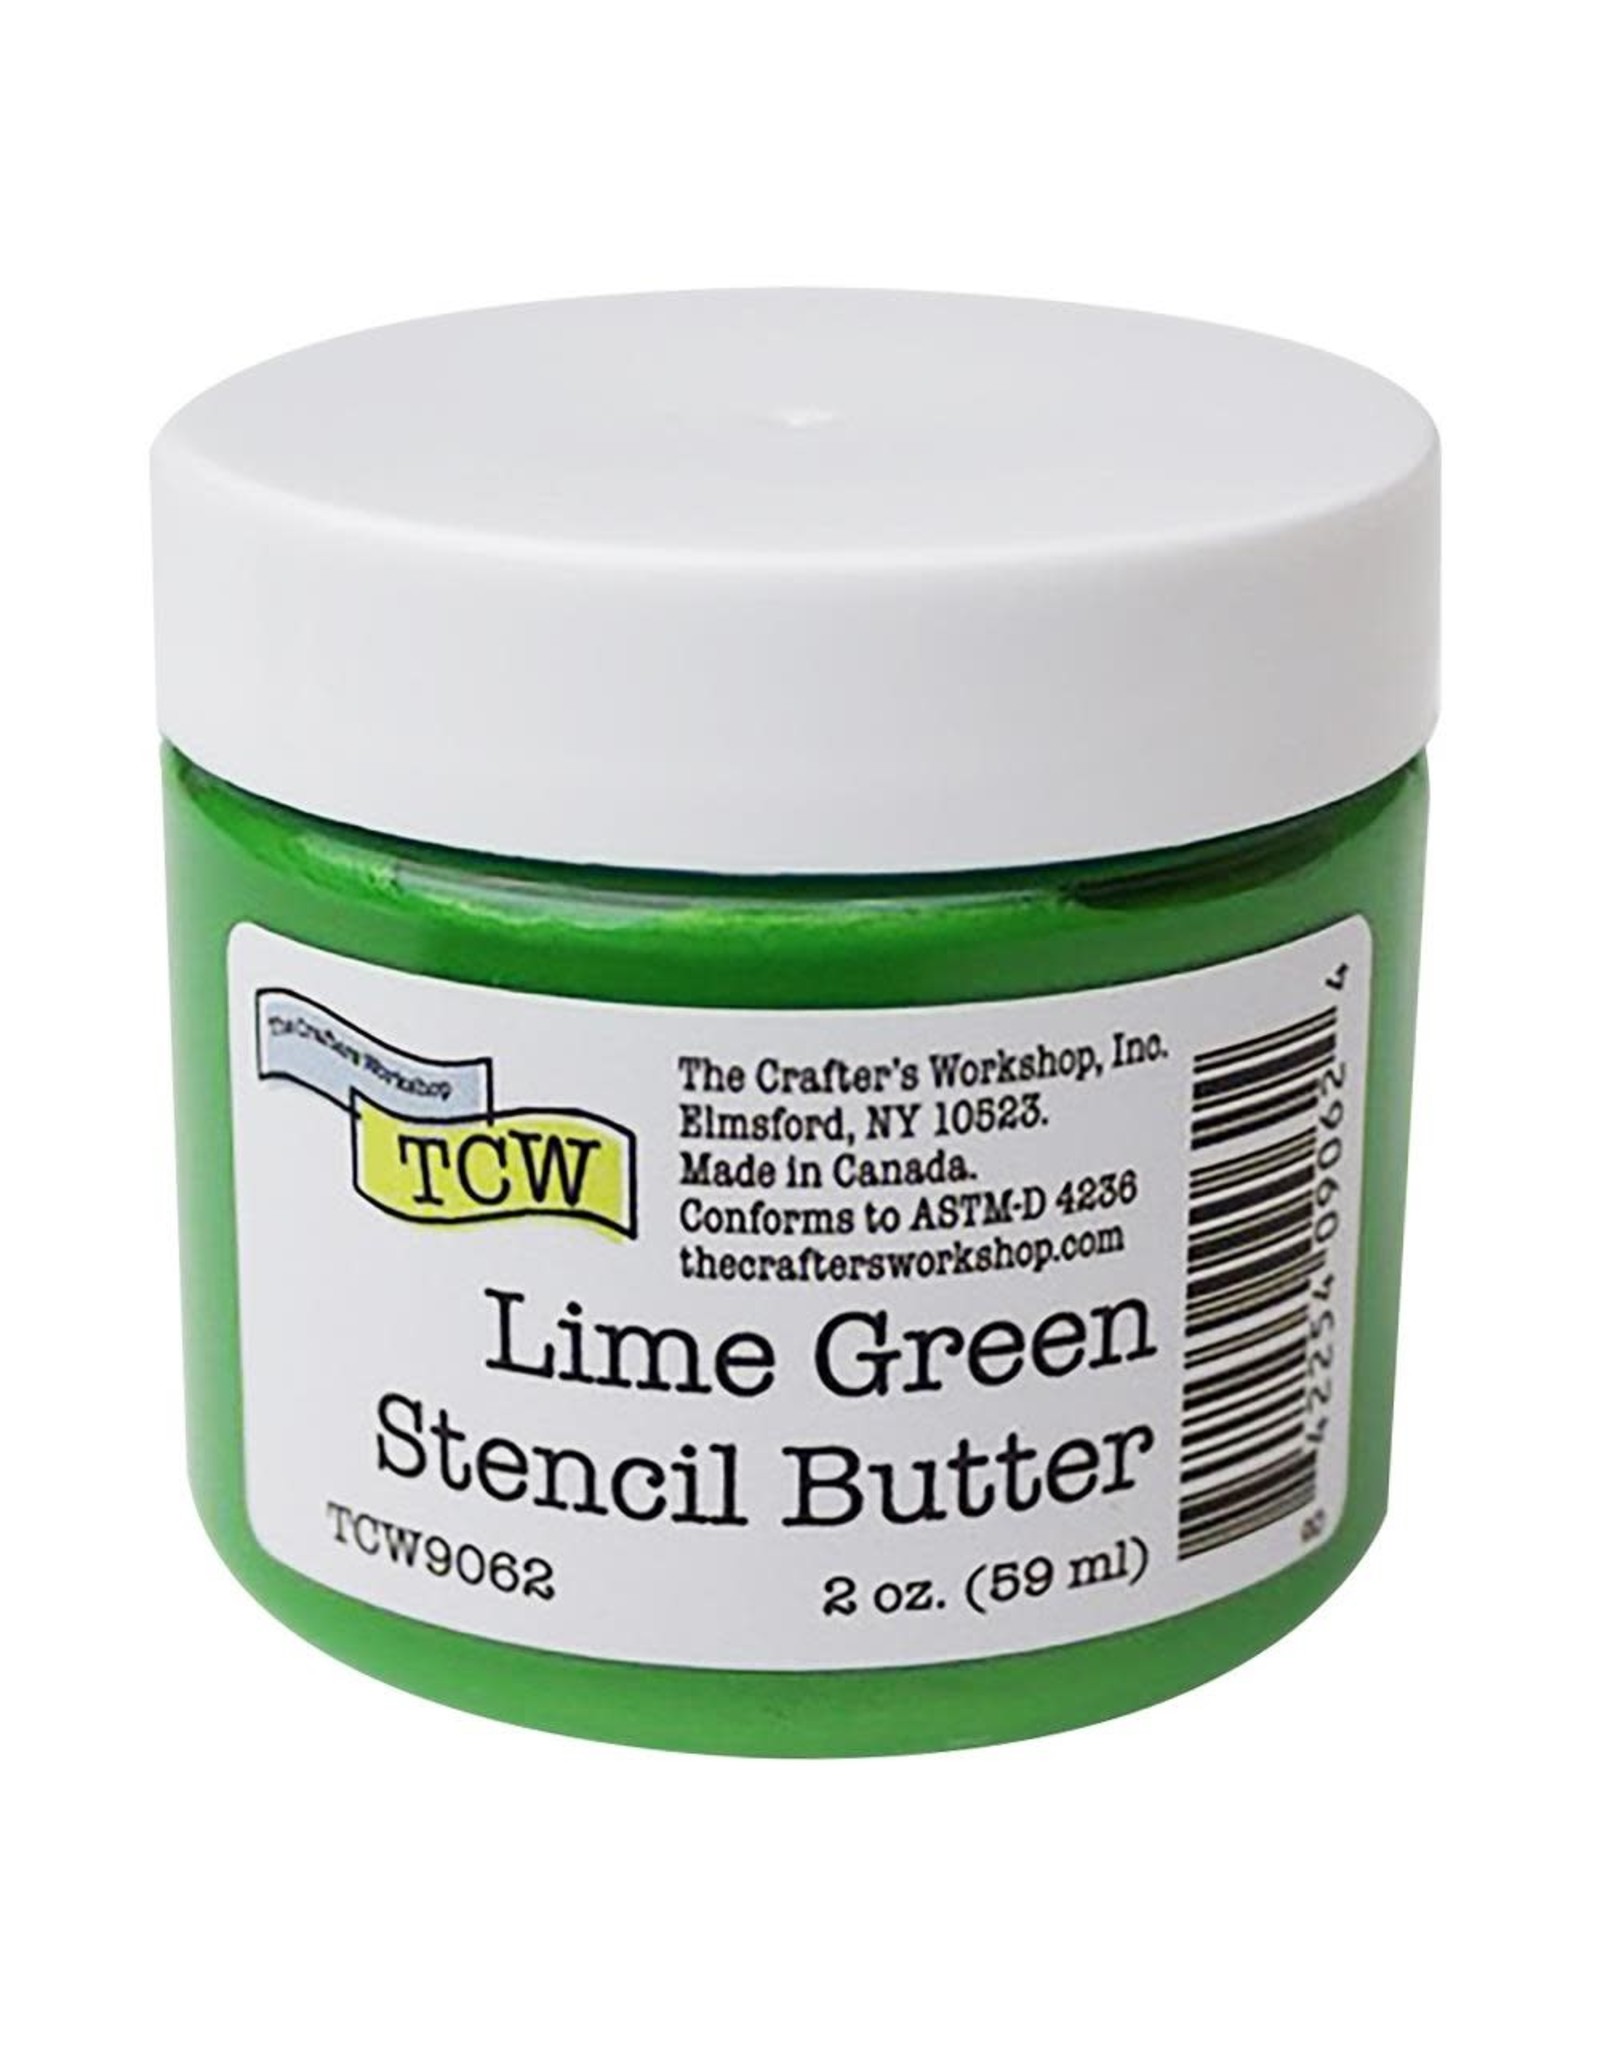 THE CRAFTERS WORKSHOP Stencil Butter 2 oz. - Lime Green